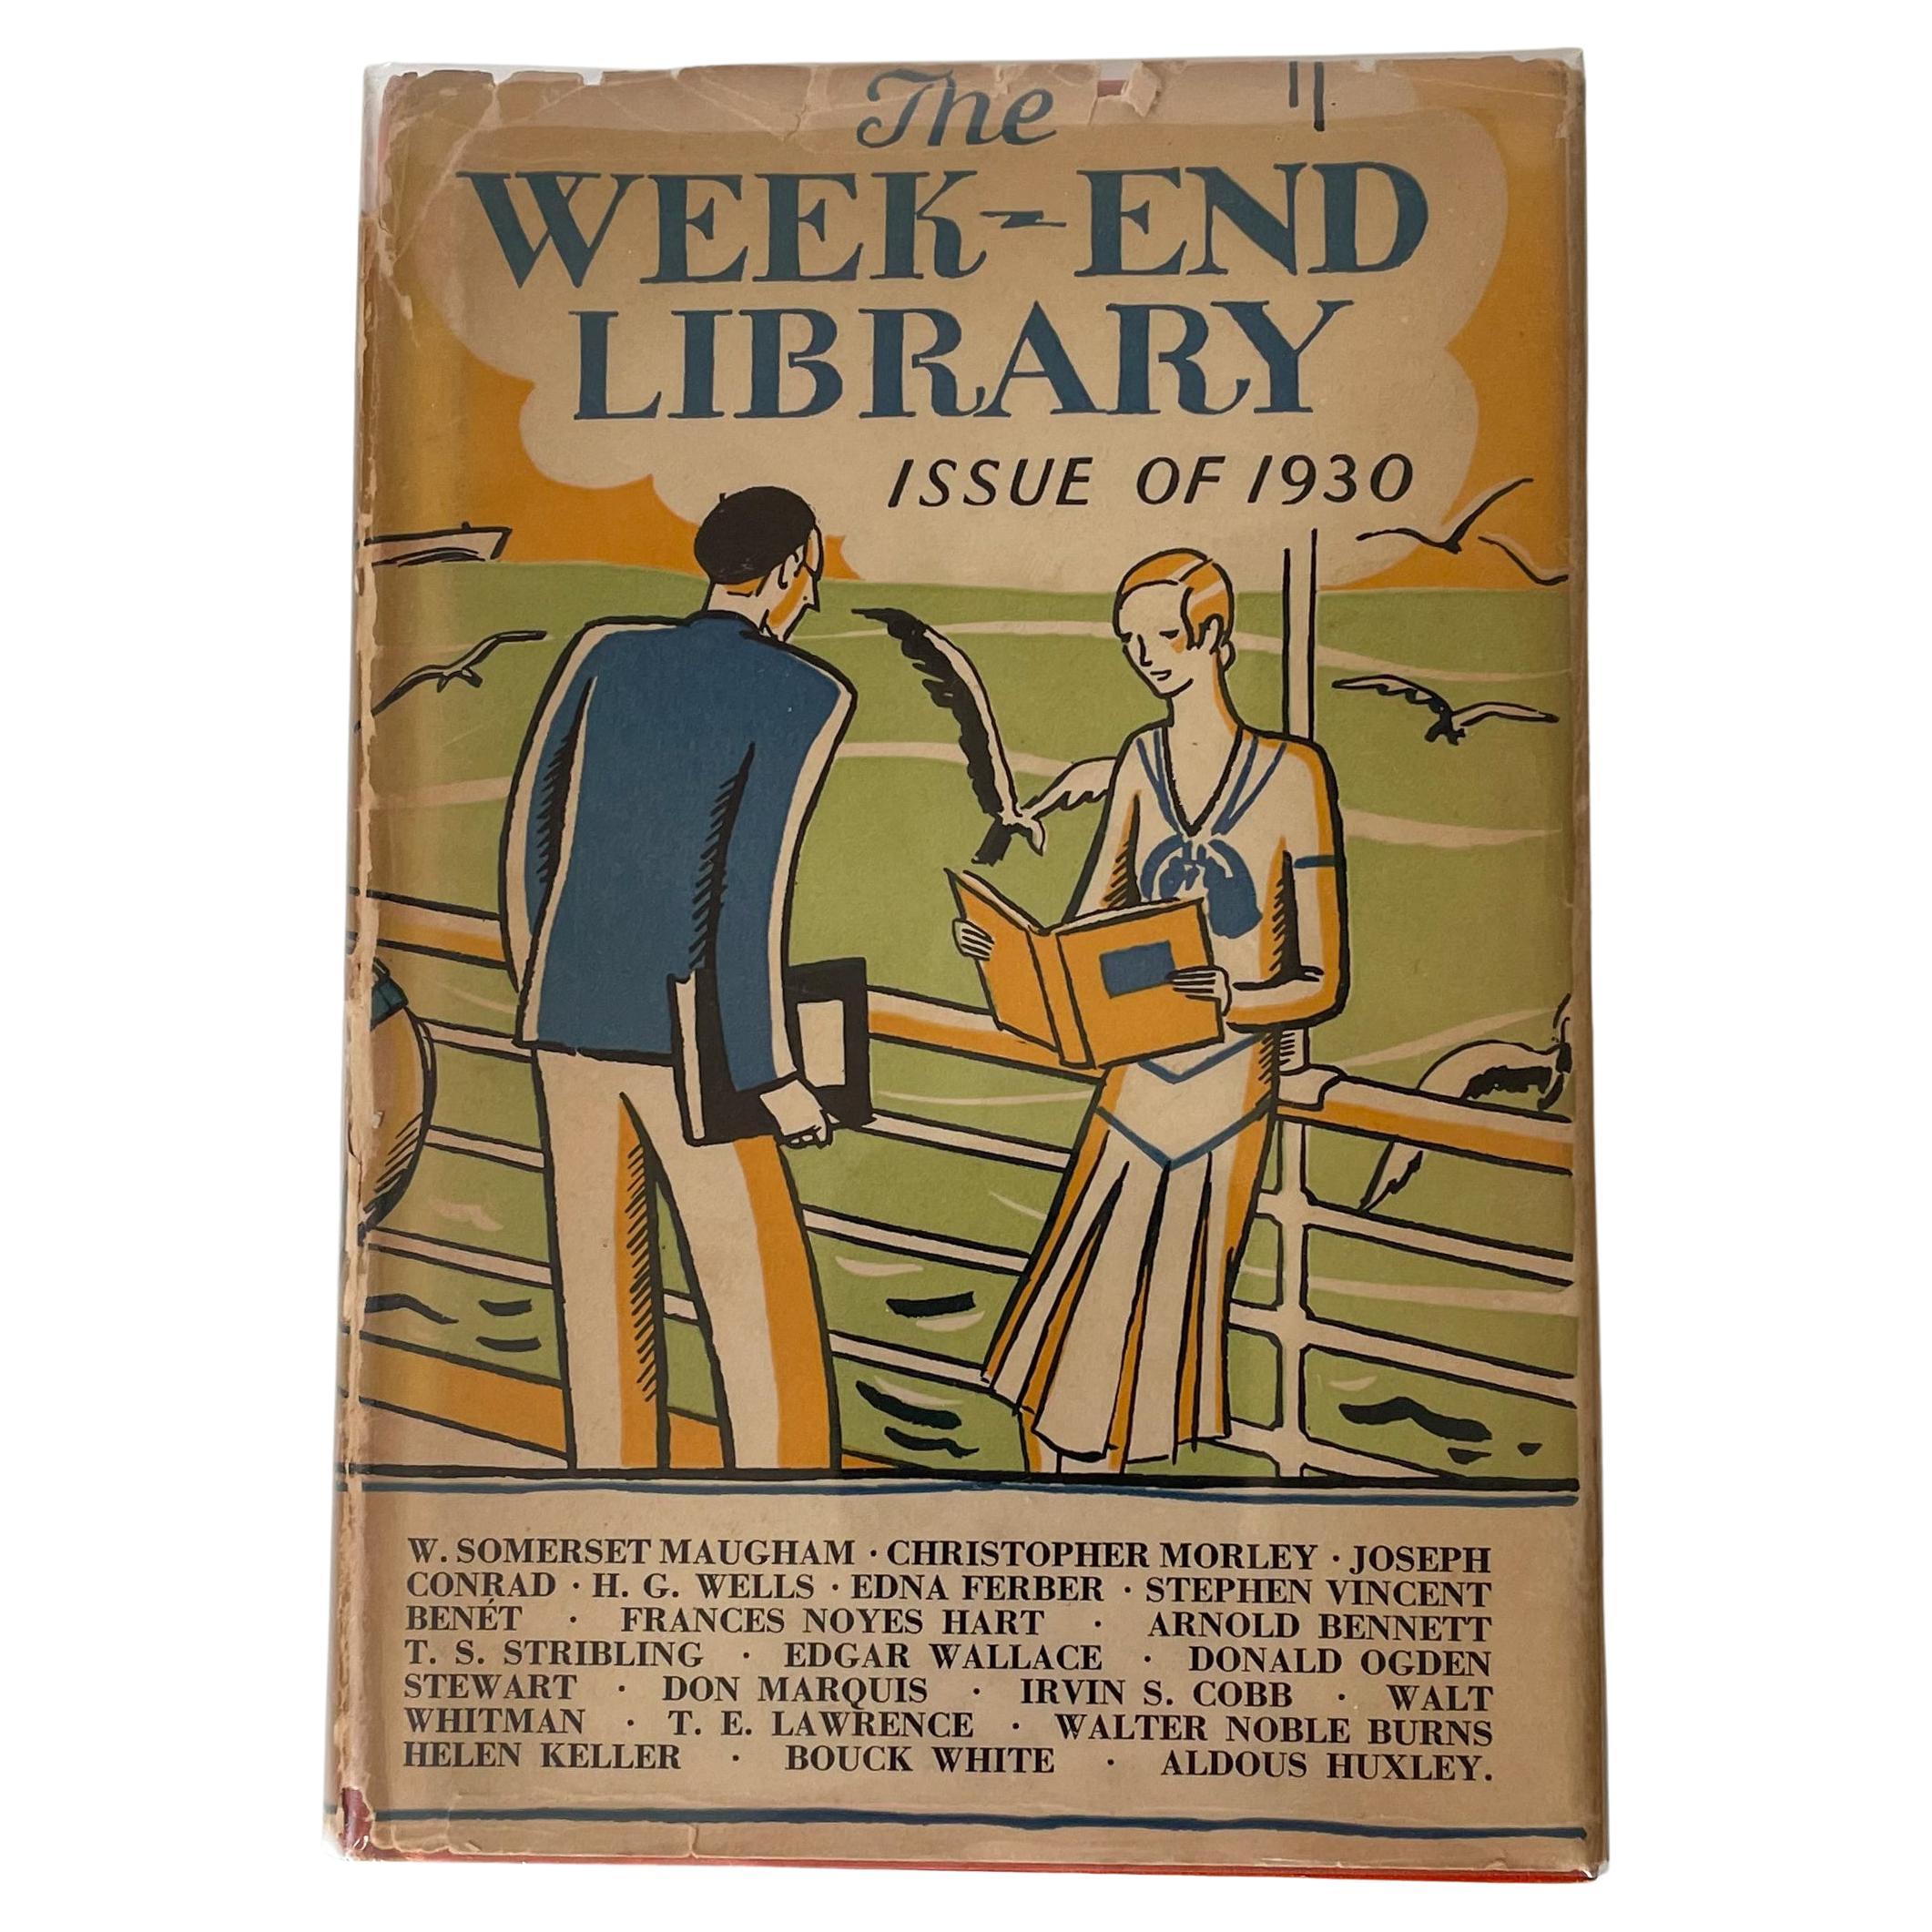 The Week-End Library Issue of 1930